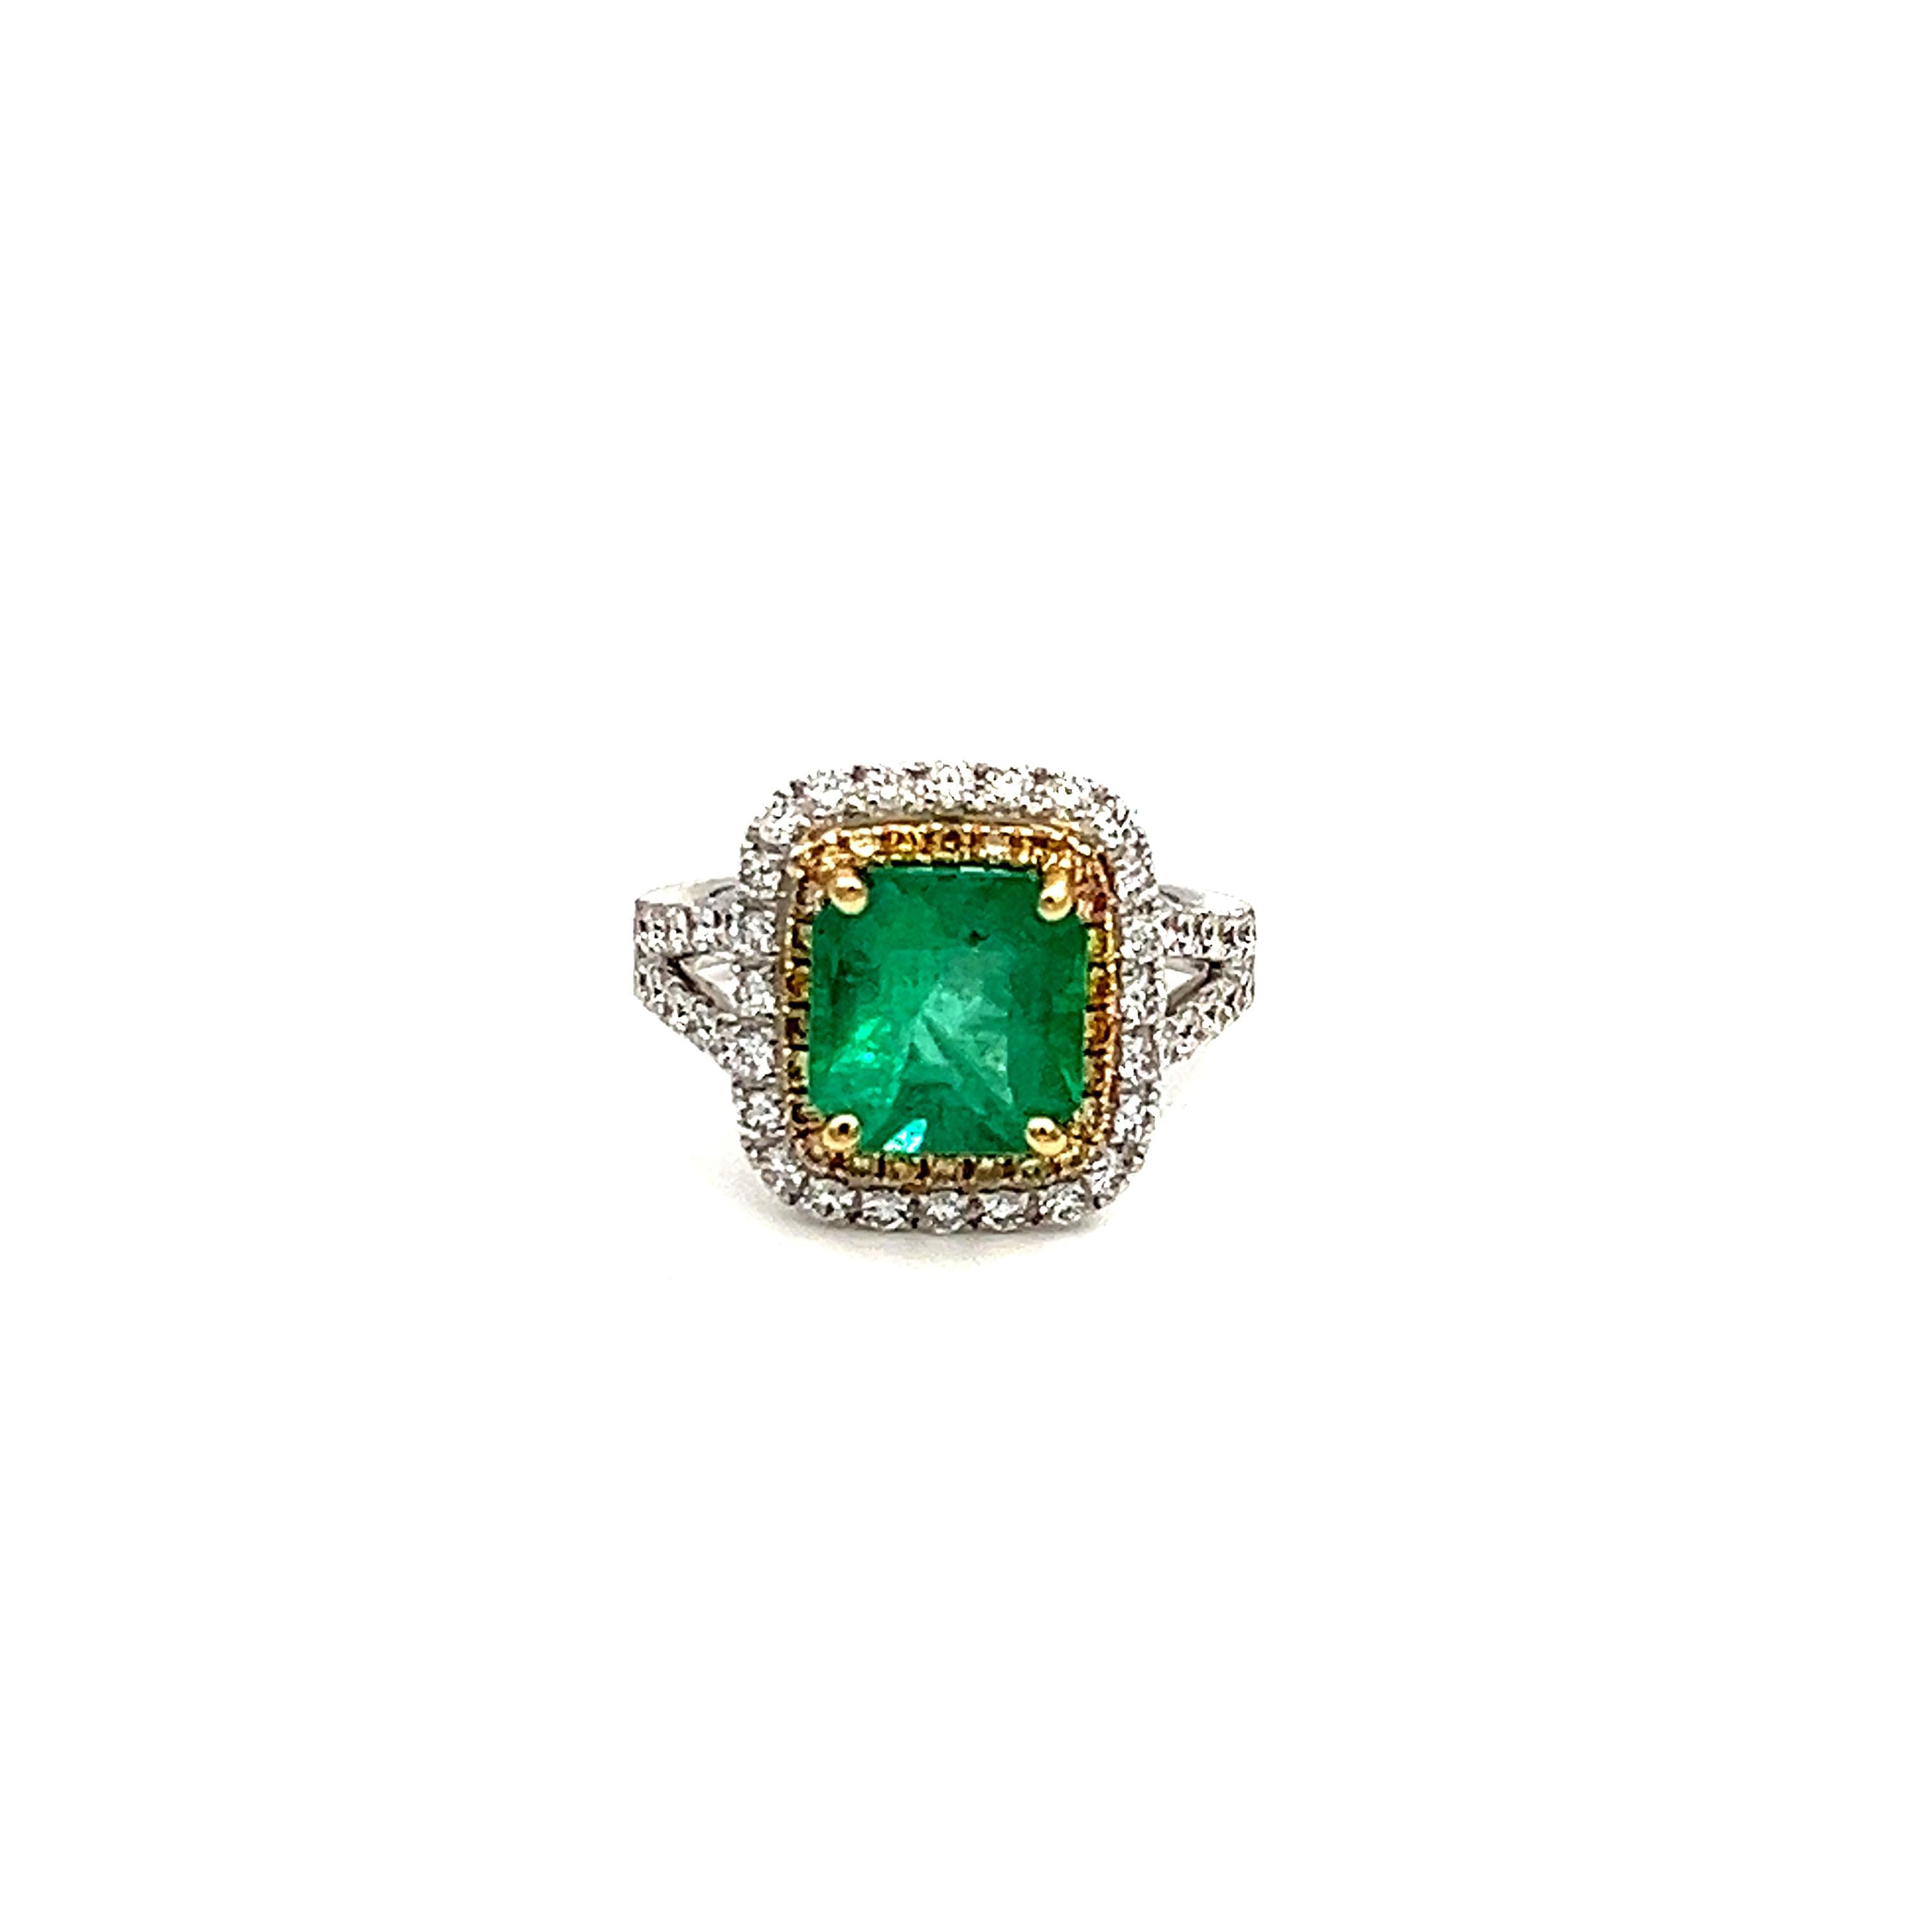 Check out this vibrant natural green emerald and diamond ring! The ring features one square shape emerald weighing 2.55 cts. The ring is also set with natural white and yellow diamonds weighing 1.01 ct total and graded VS. The ring is made in 18k